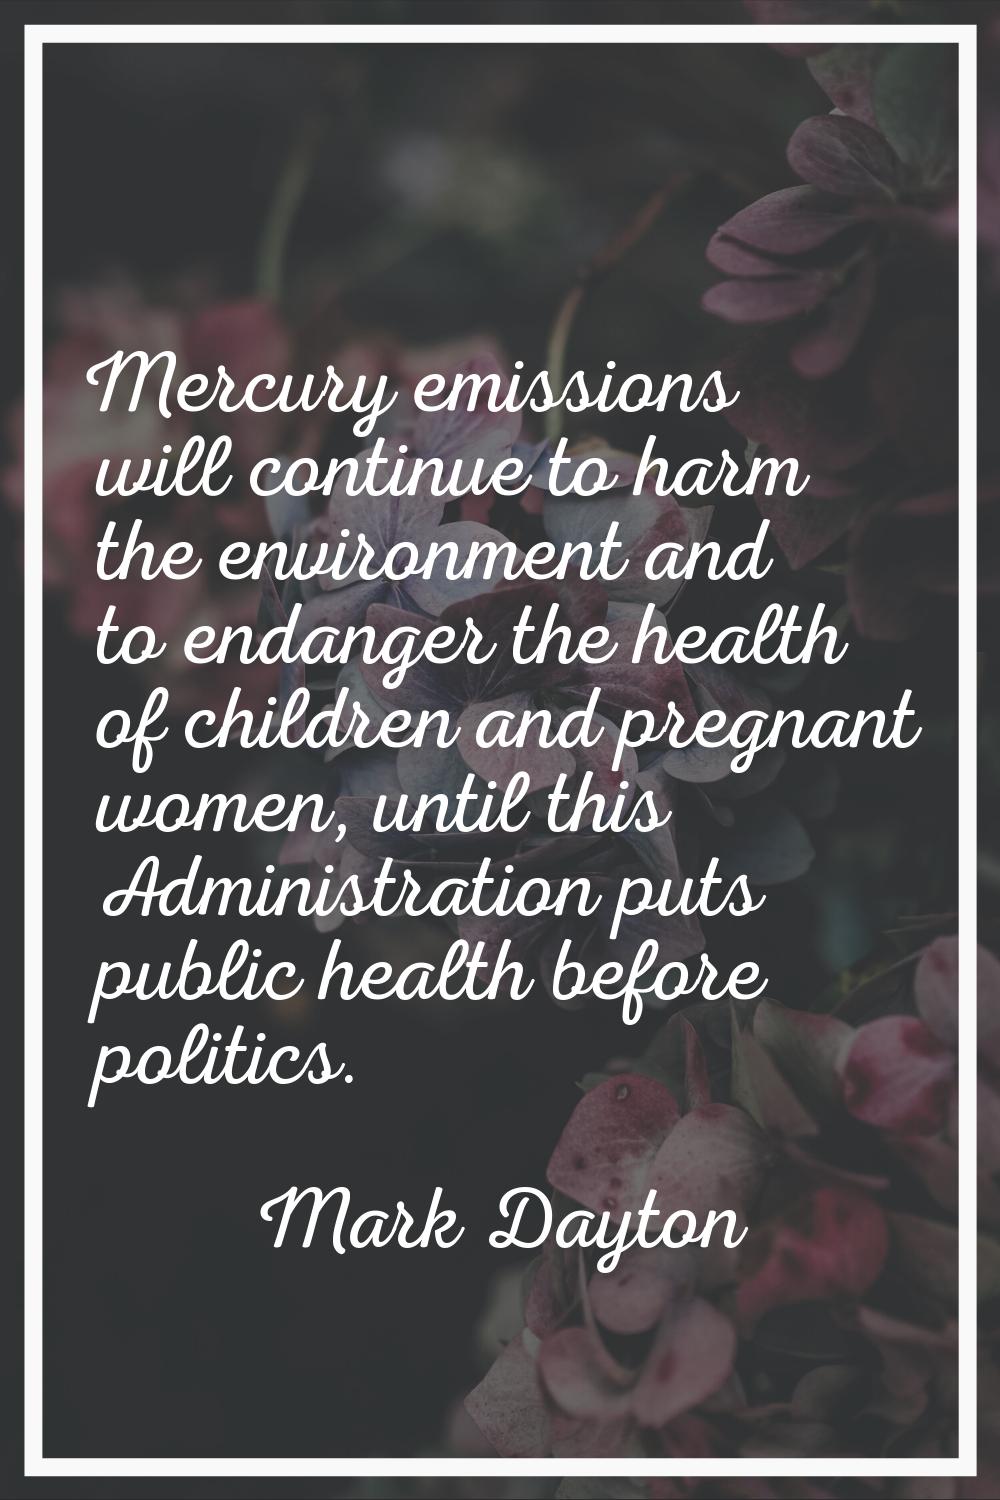 Mercury emissions will continue to harm the environment and to endanger the health of children and 